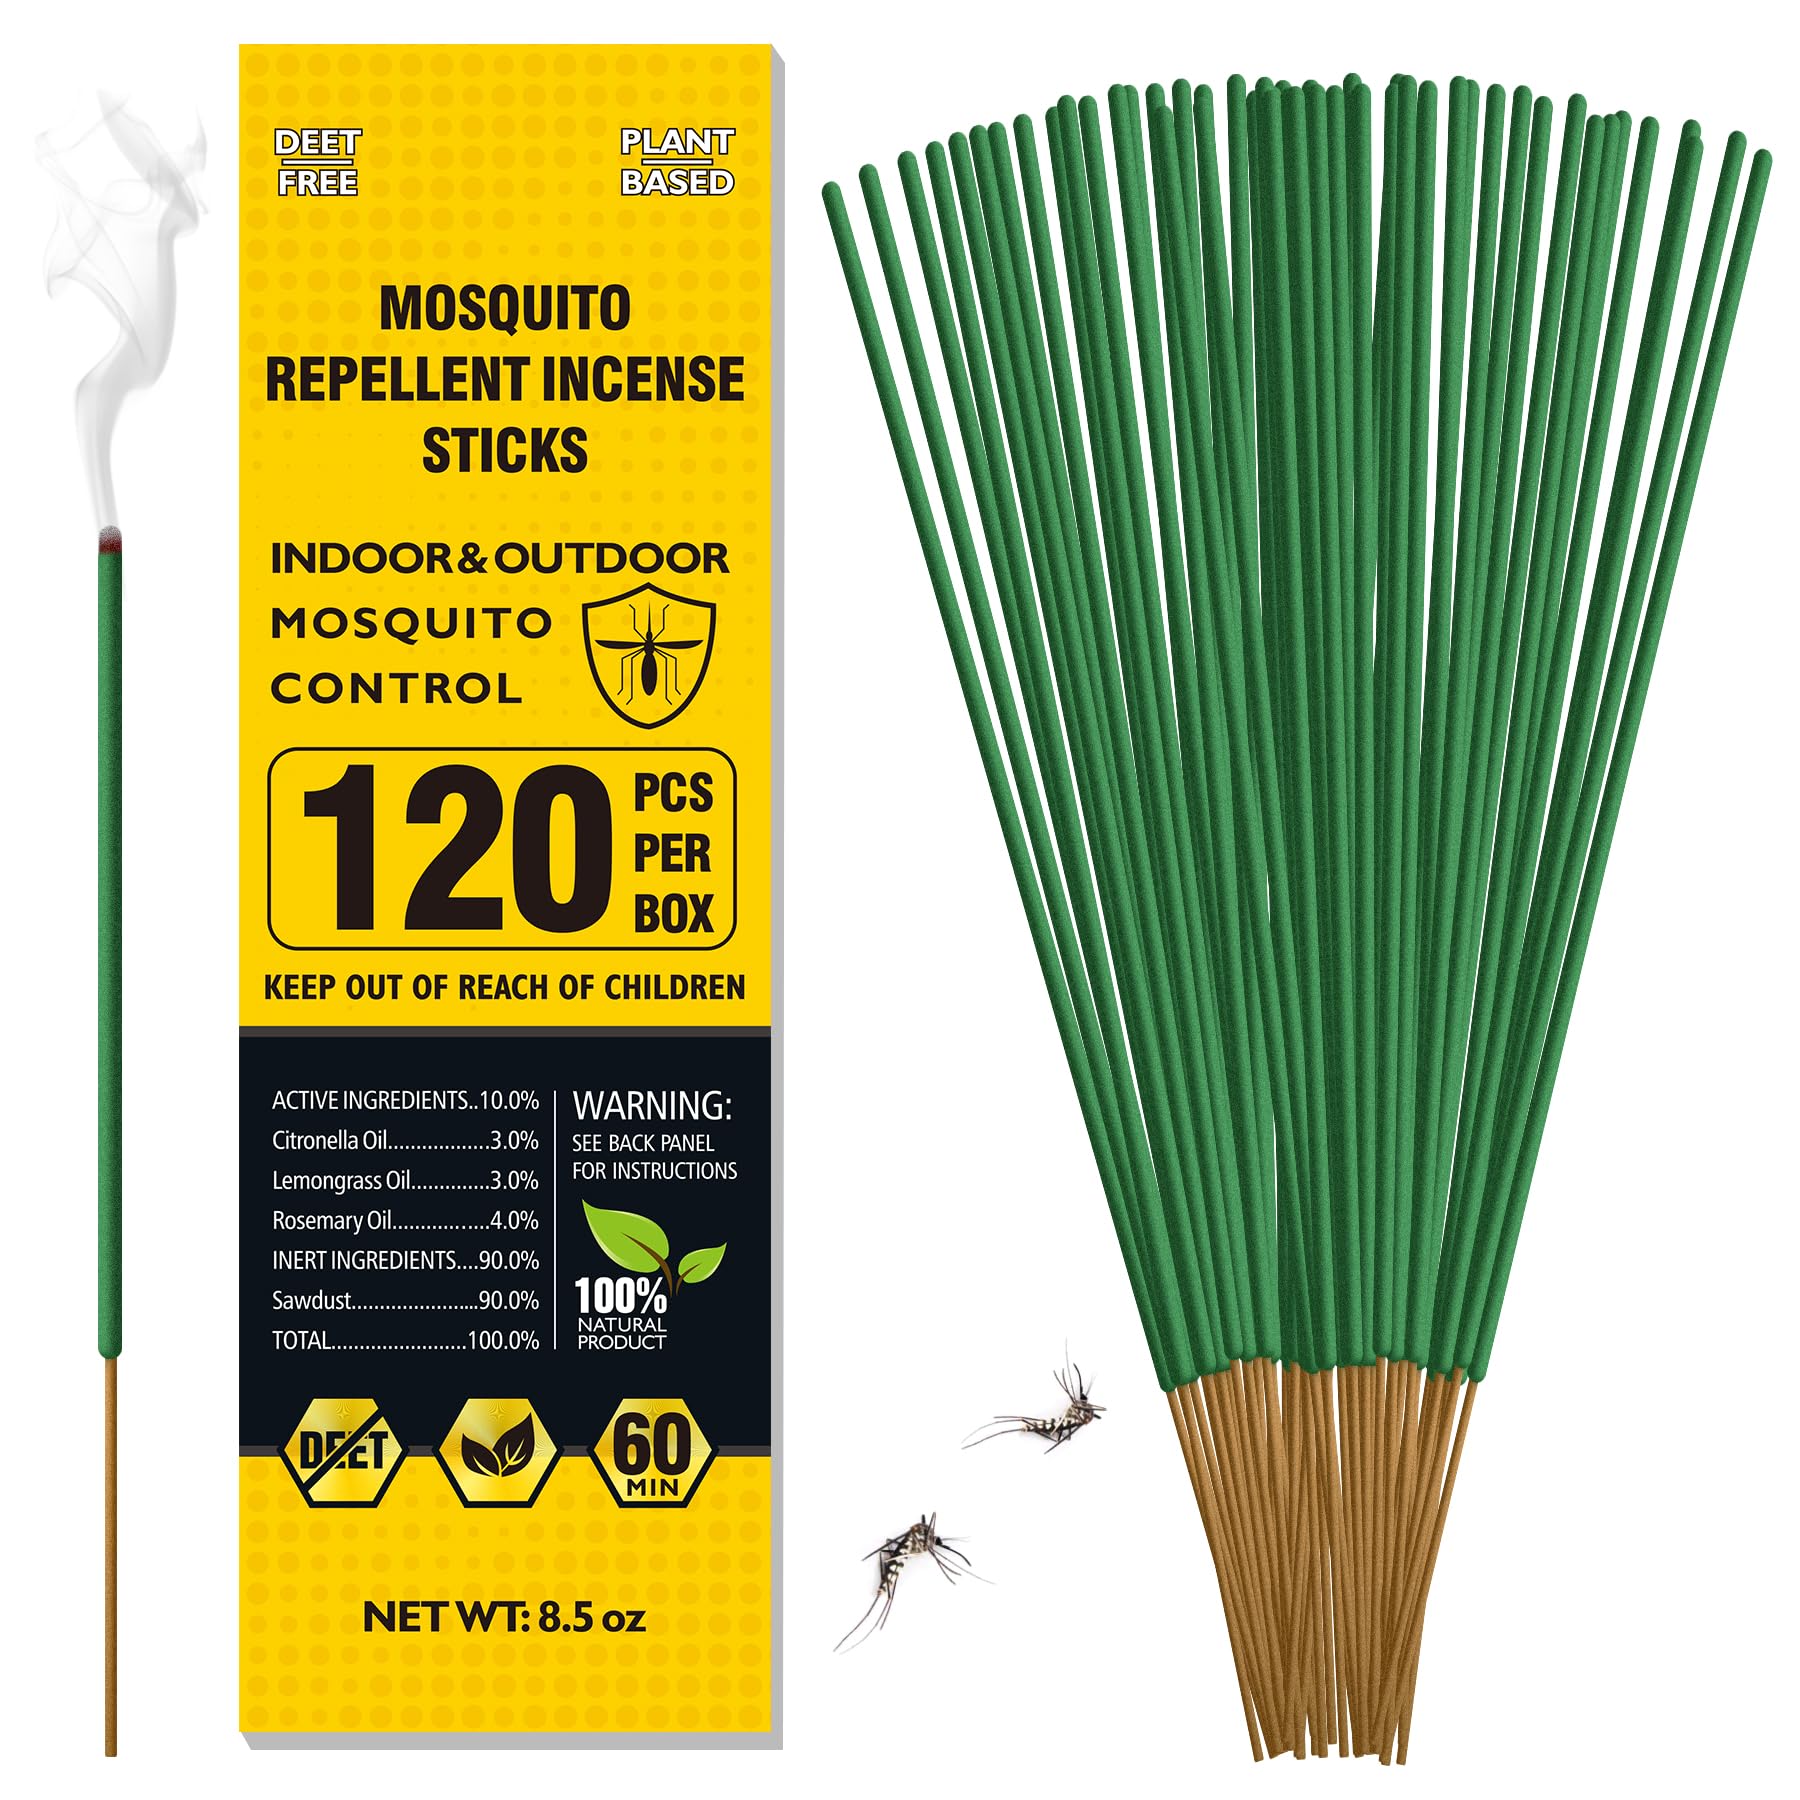 BugBai Mosquito Repellent Outdoor Patio 120 PCS, Citronella Oil Mosquito Incense Sticks Indoor Home Pet Family Safe, Natural Plant-Based Bug Insect Barrier for Yard Garden Lawn Camping Fishing